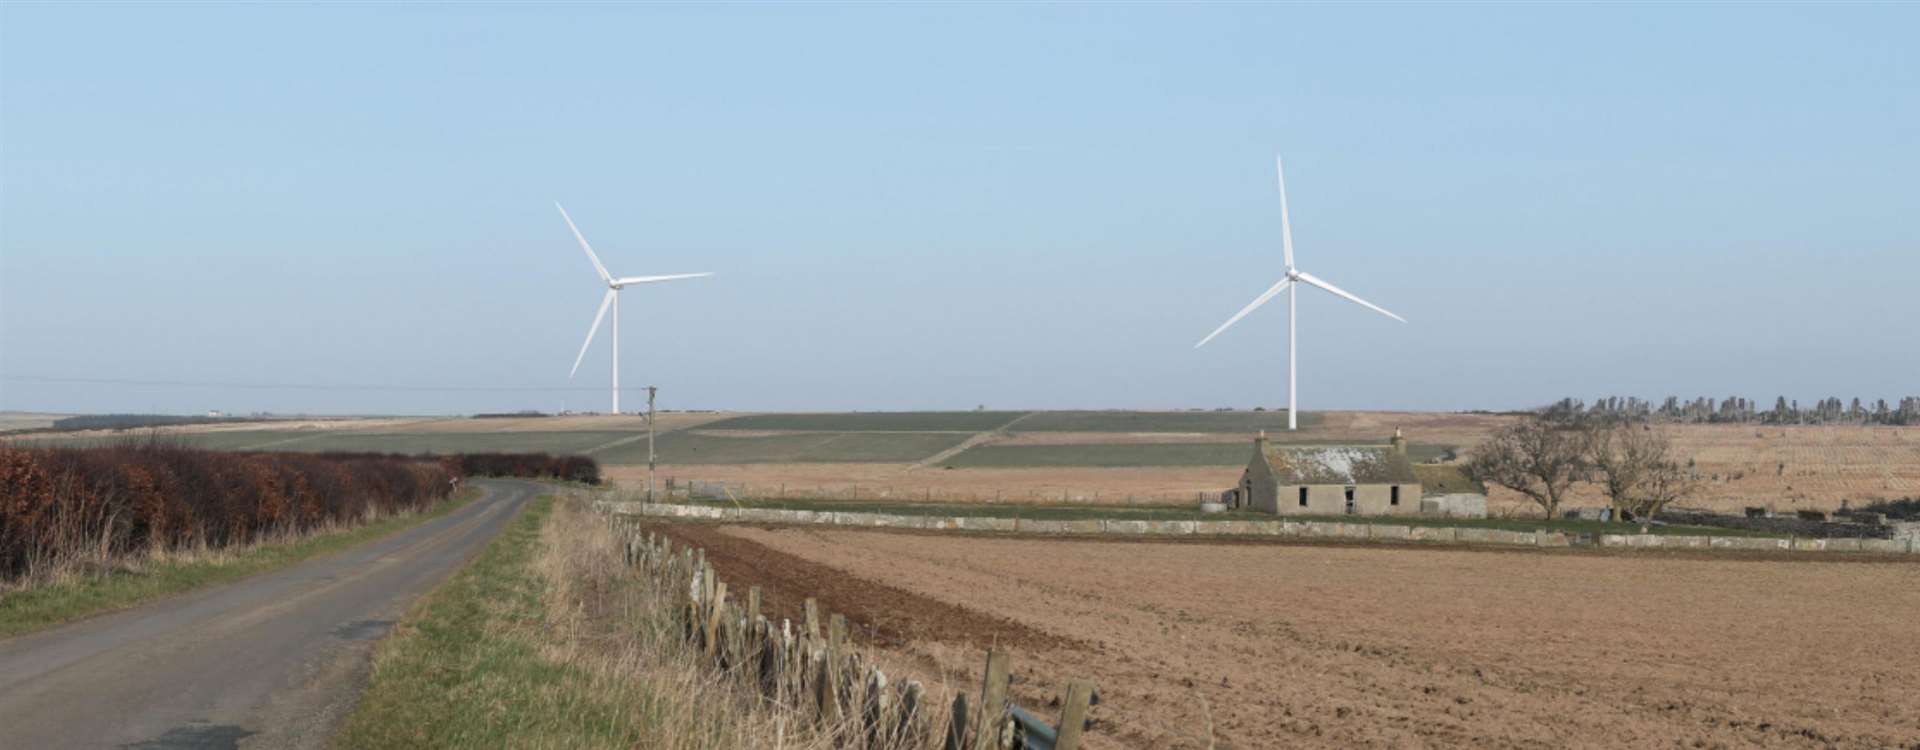 An image published last year illustrating how the Swarclett wind turbines could look if consented by Highland Council.